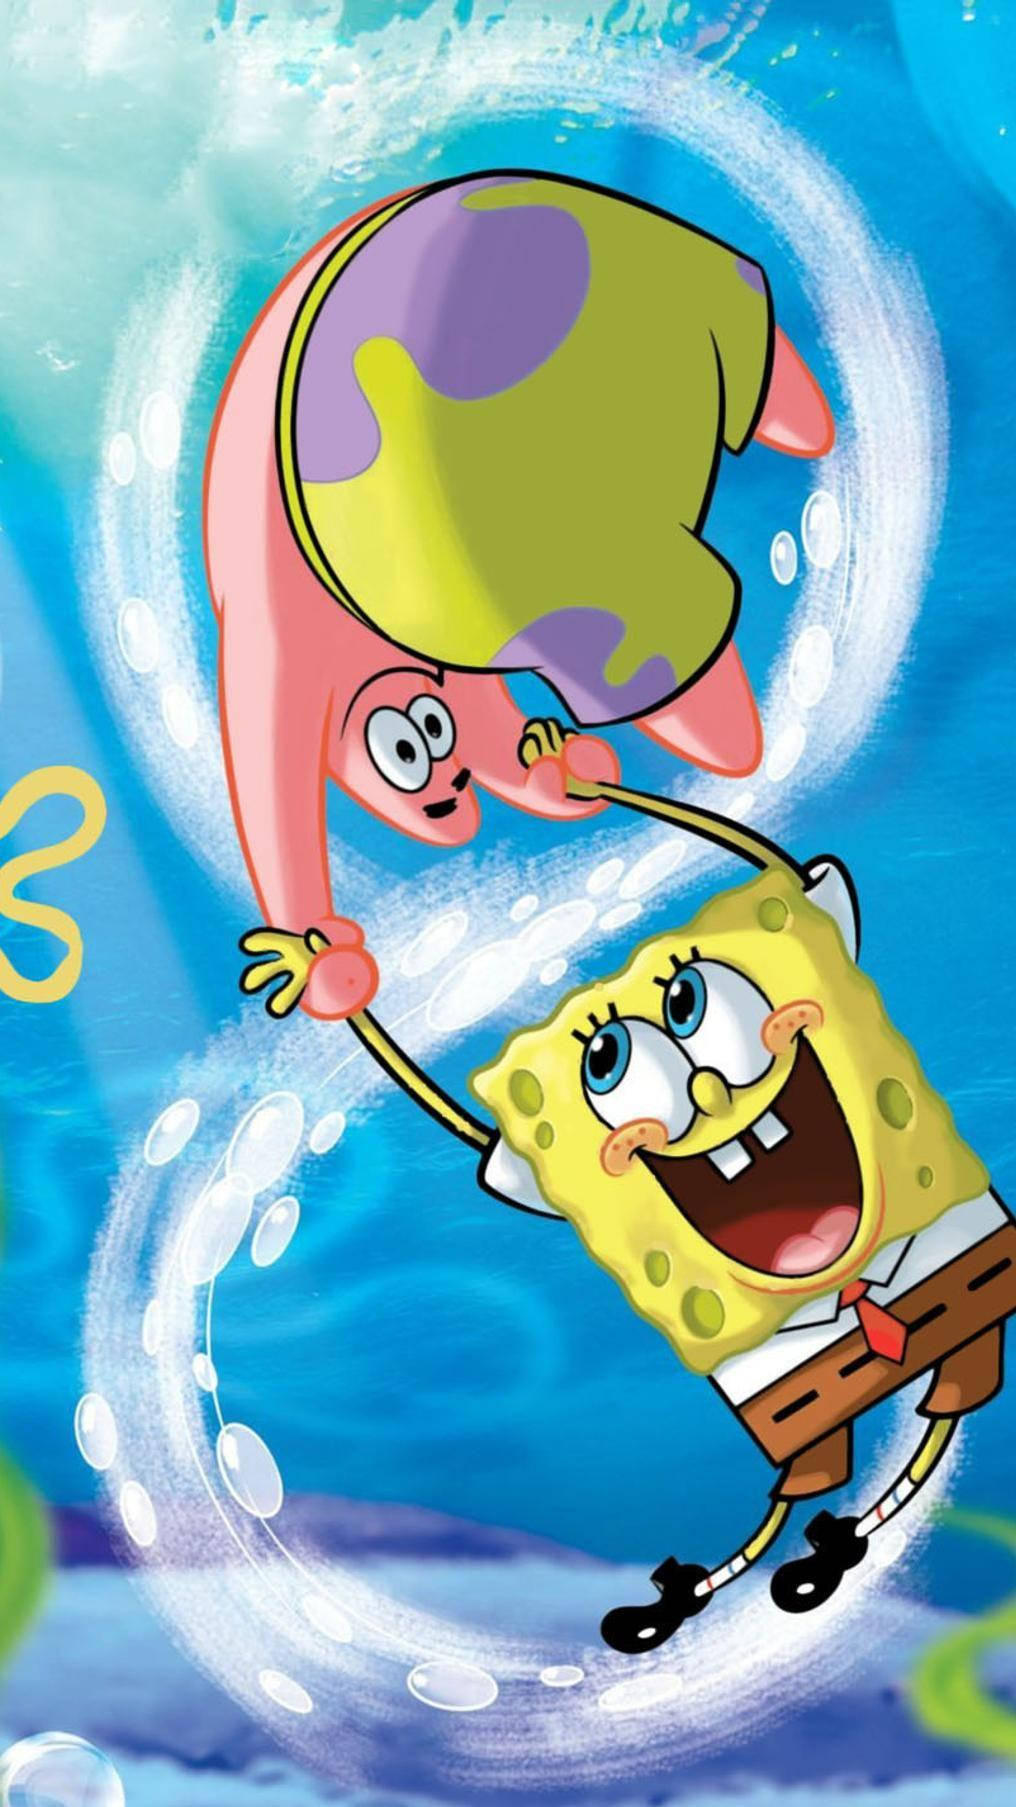 Spongebob And Patrick In The Air Background